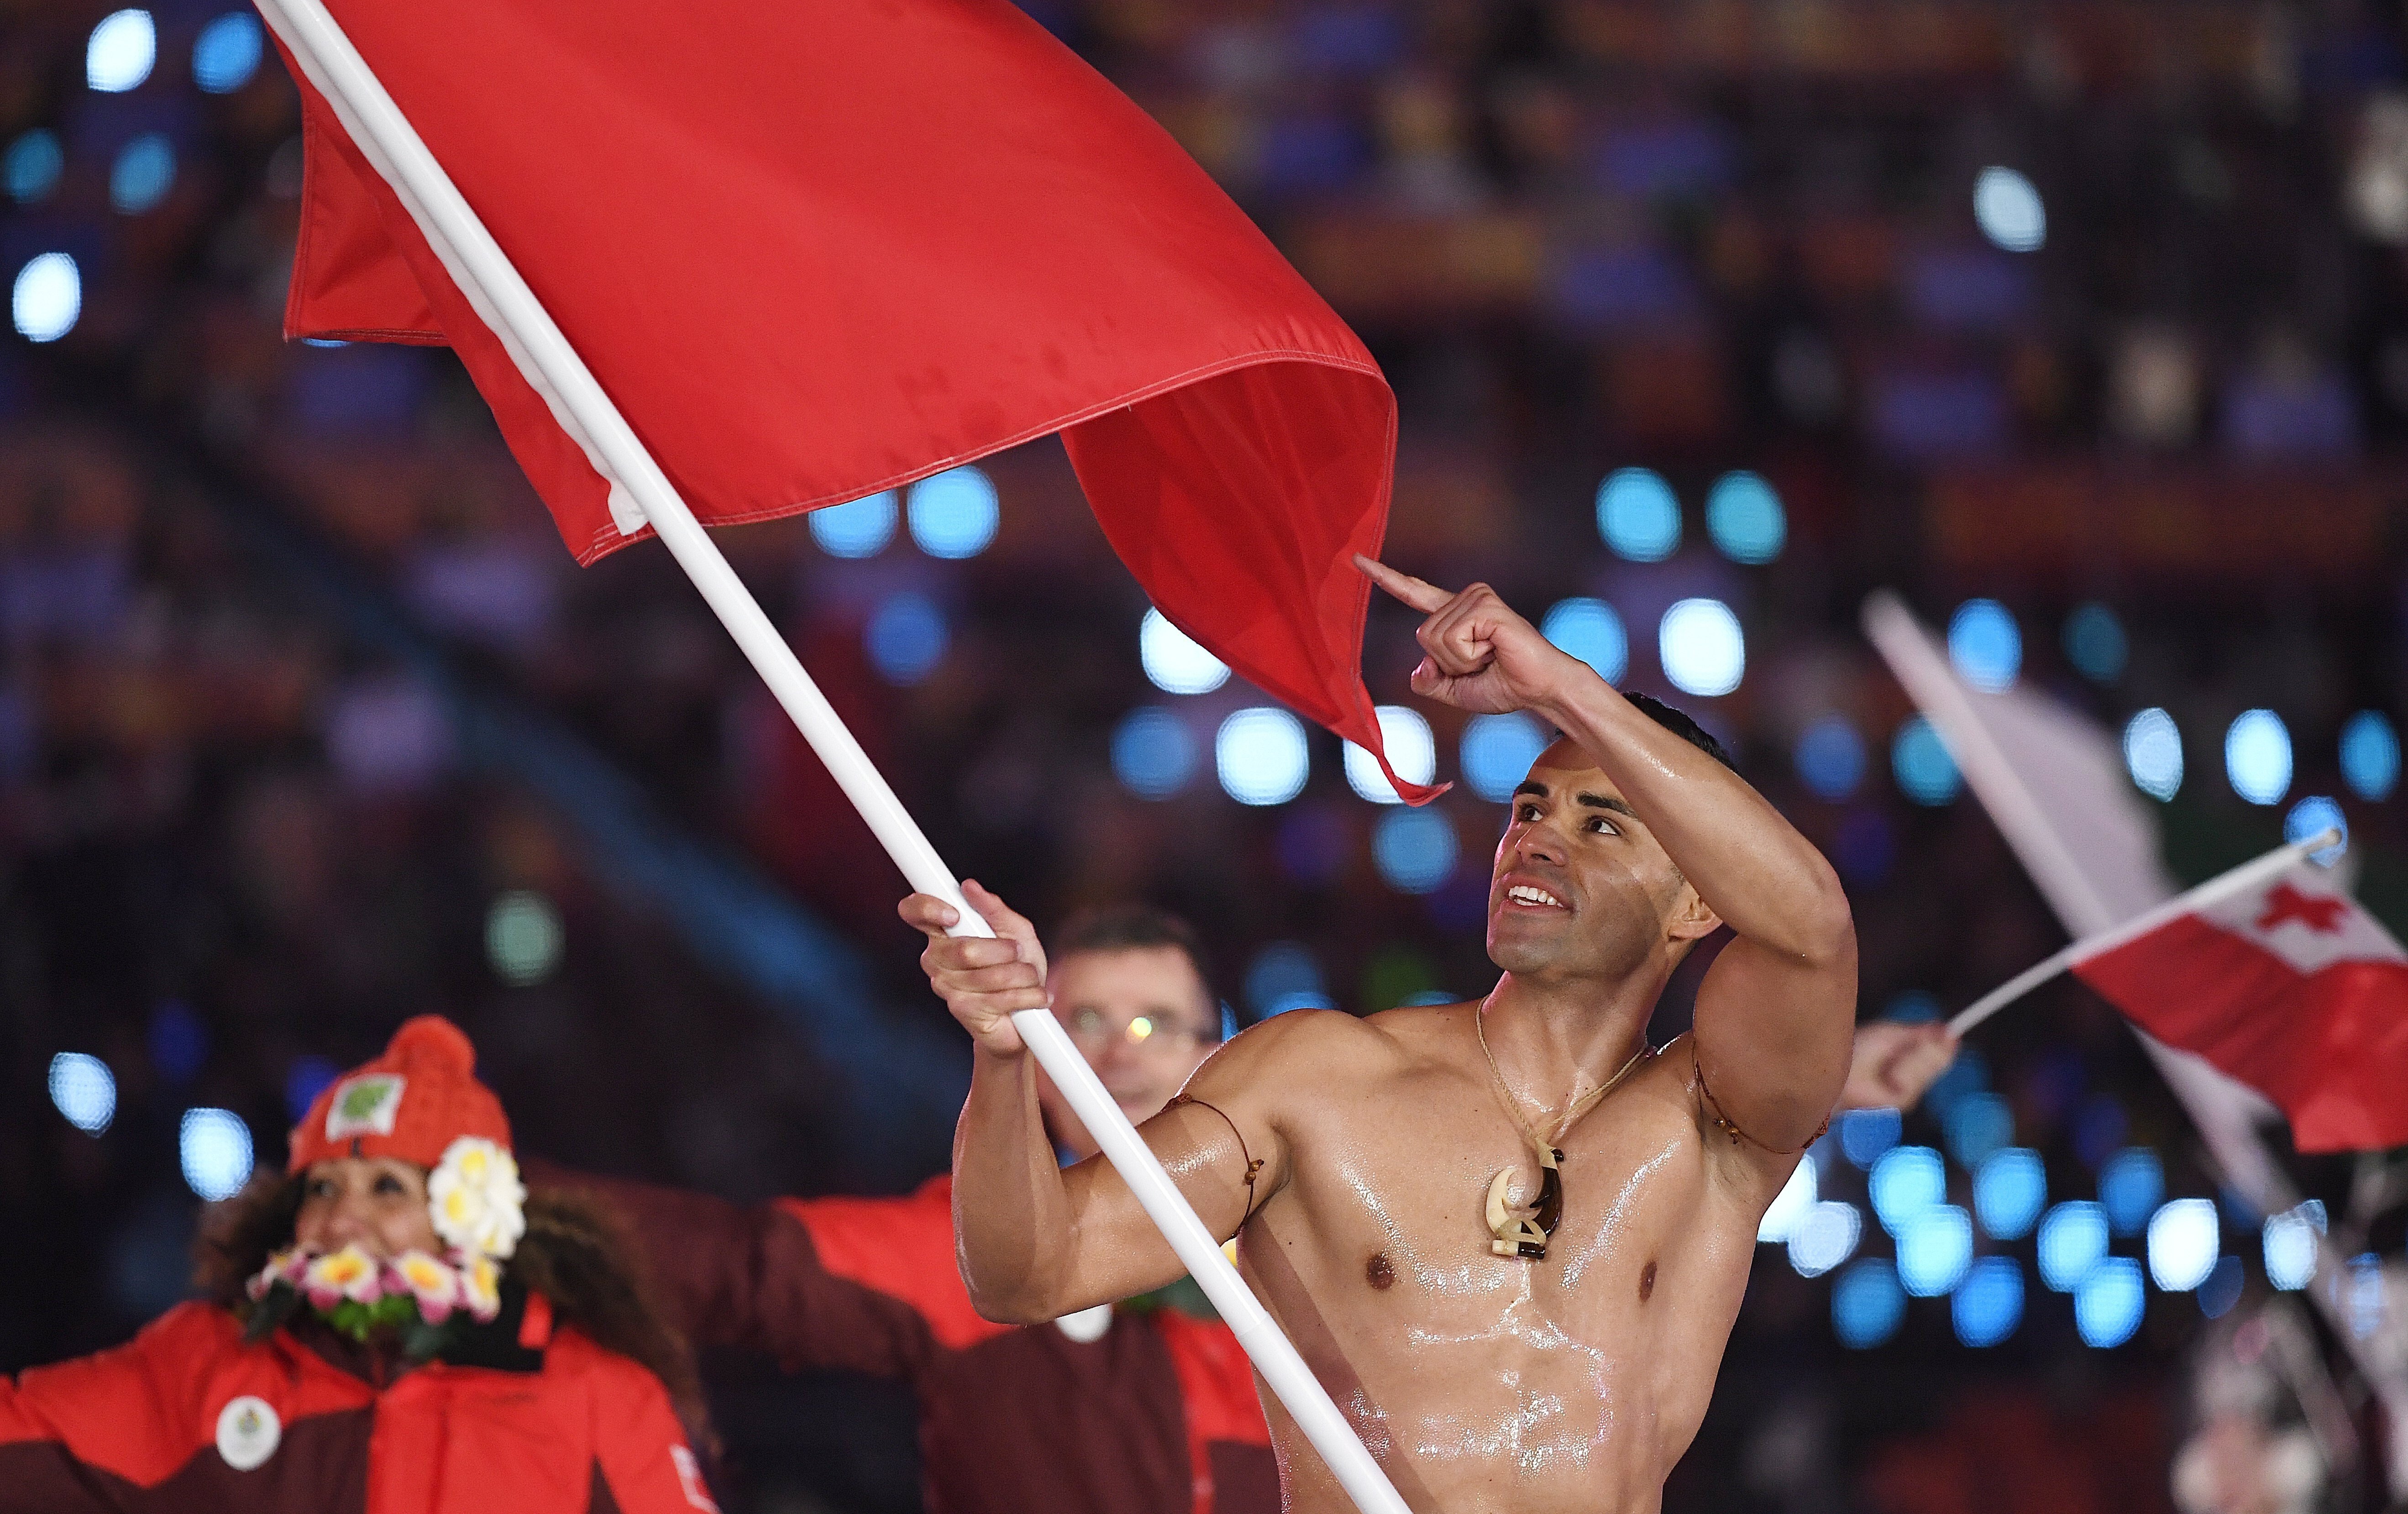 Team Tonga with flag bearer Pita Taufatofua arrive at the opening ceremony of the Pyeongchang 2018 Winter Olympic Games at the Olympic Stadium in South Korea. Photo: EPA